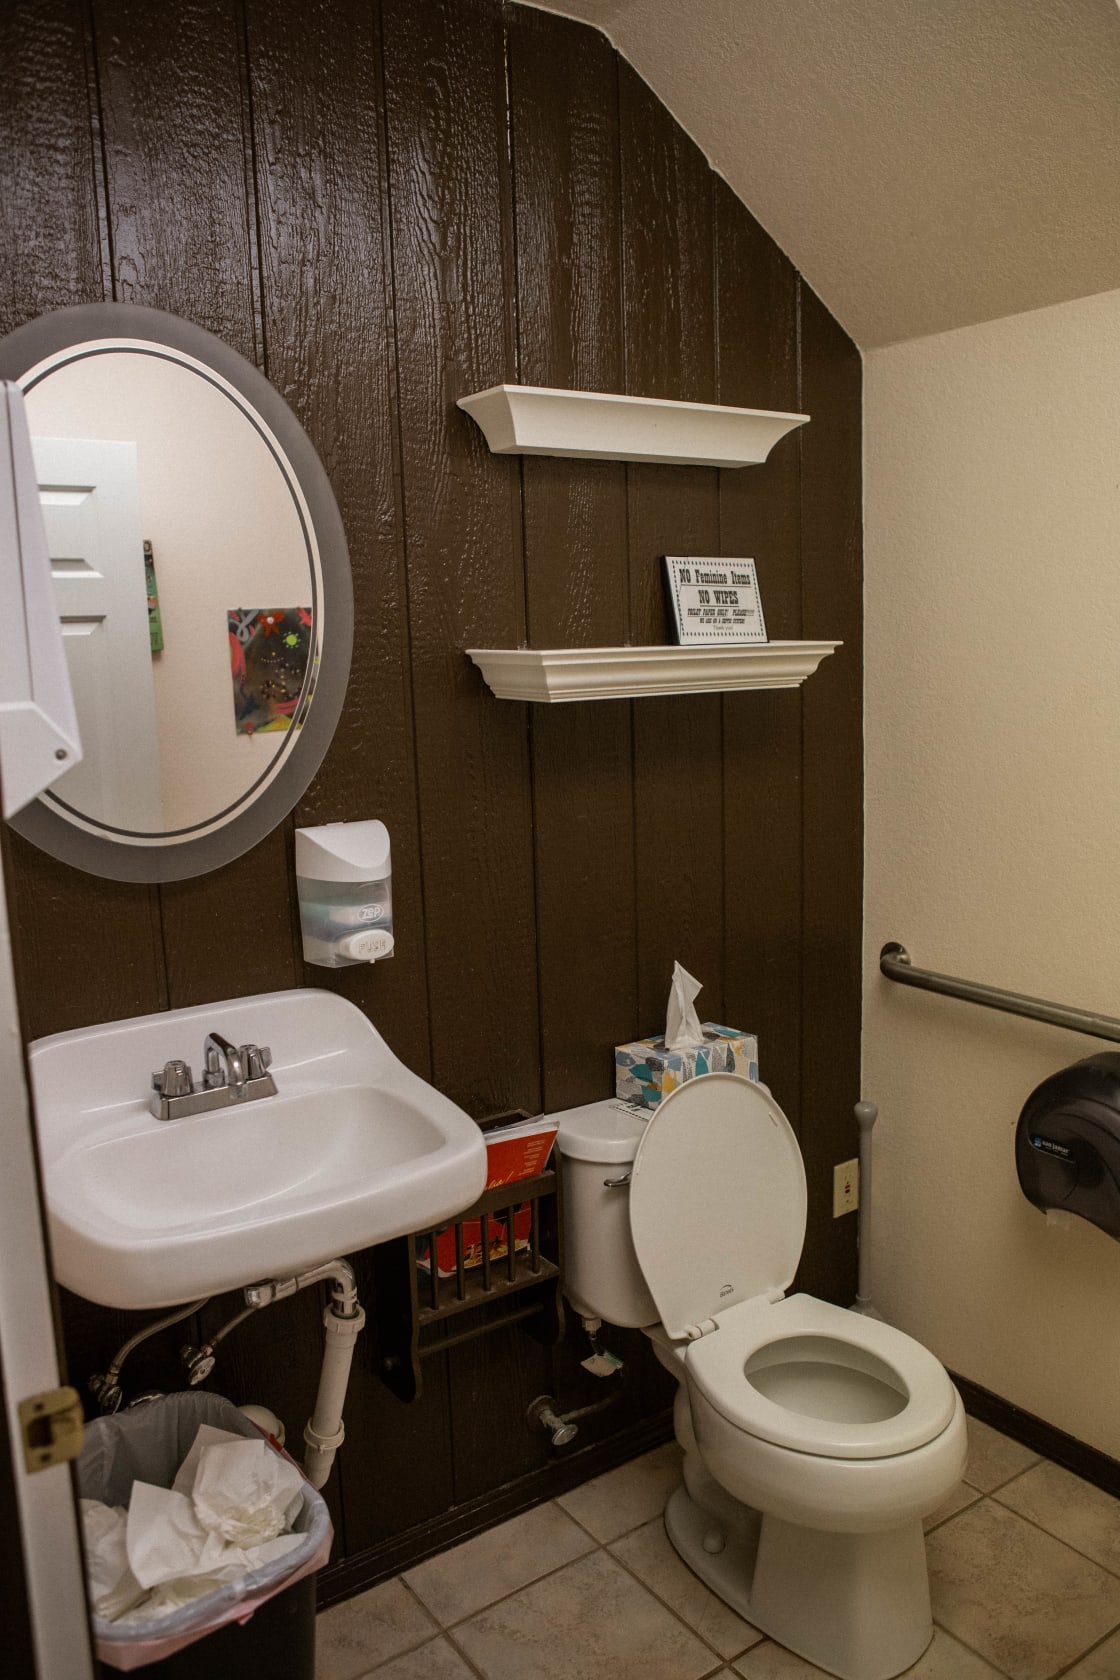 The lodge also contains the bathroom, which is maybe 100 feet from the cabin. There is no bathroom in the cabin.